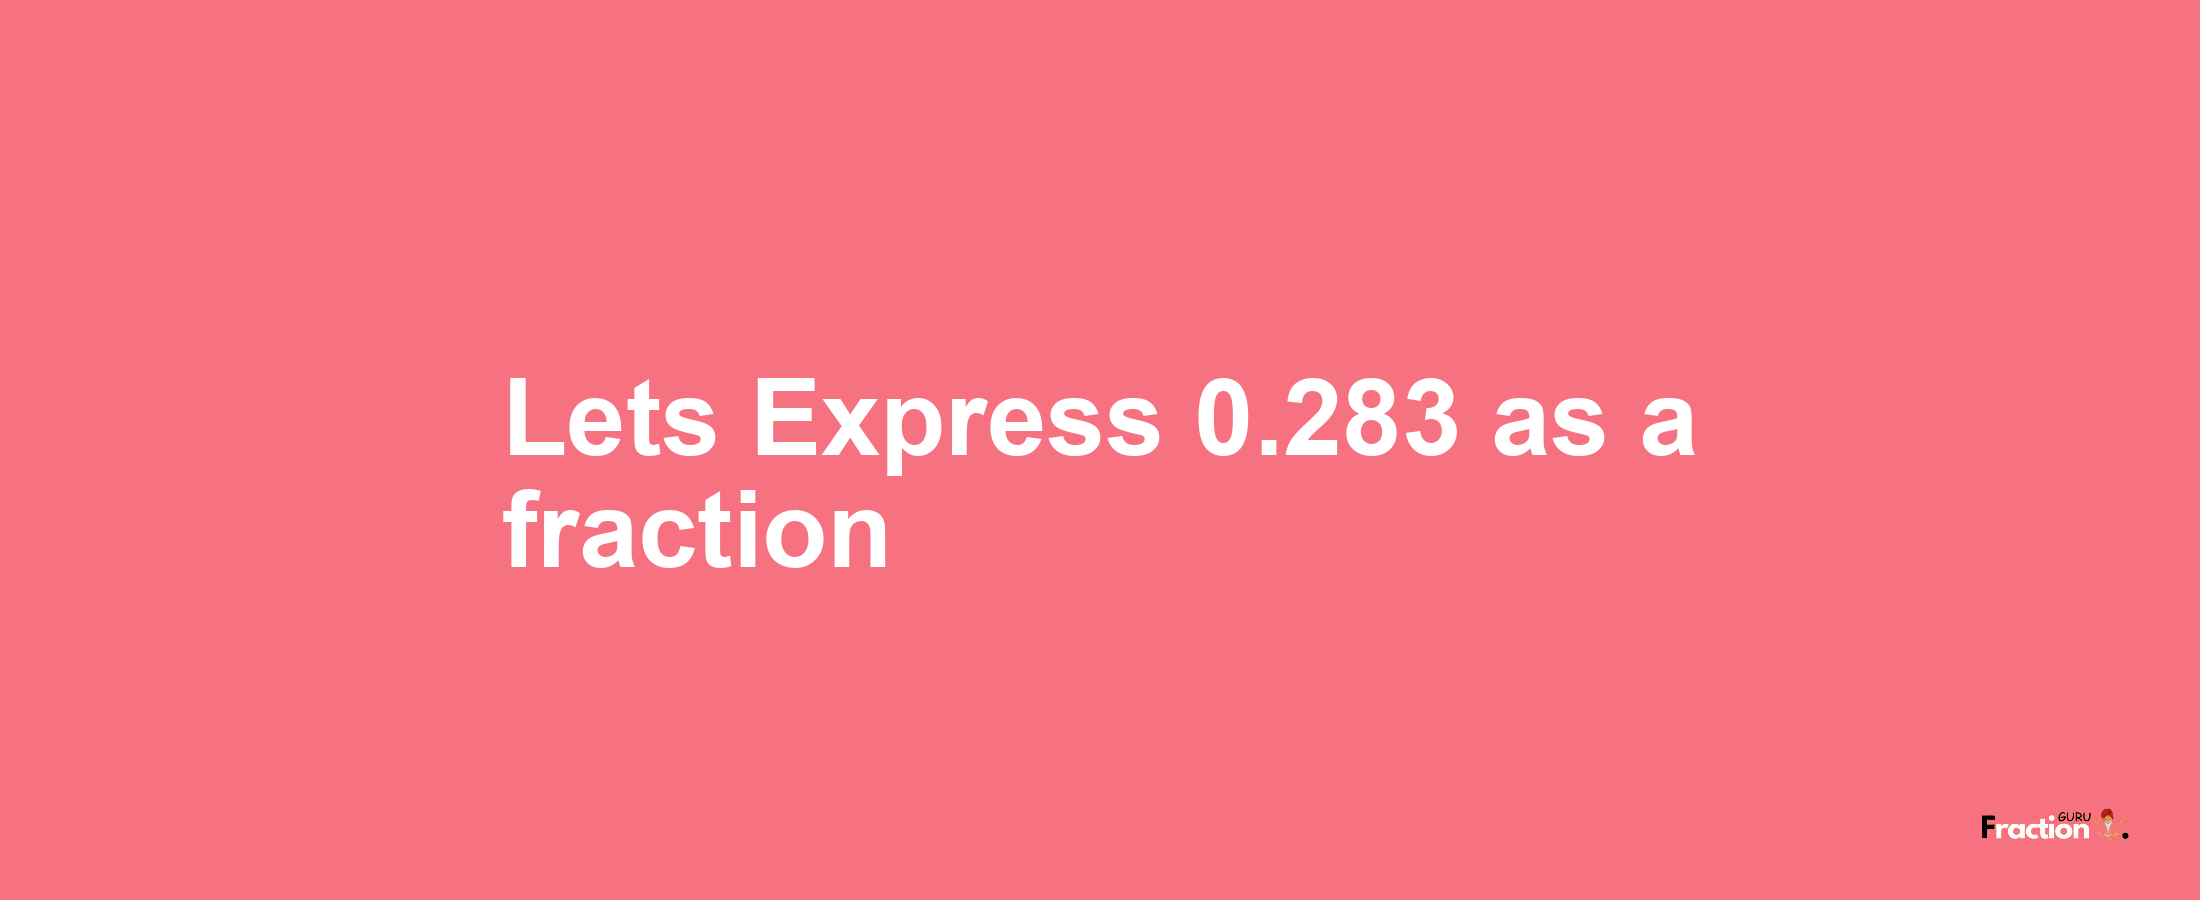 Lets Express 0.283 as afraction